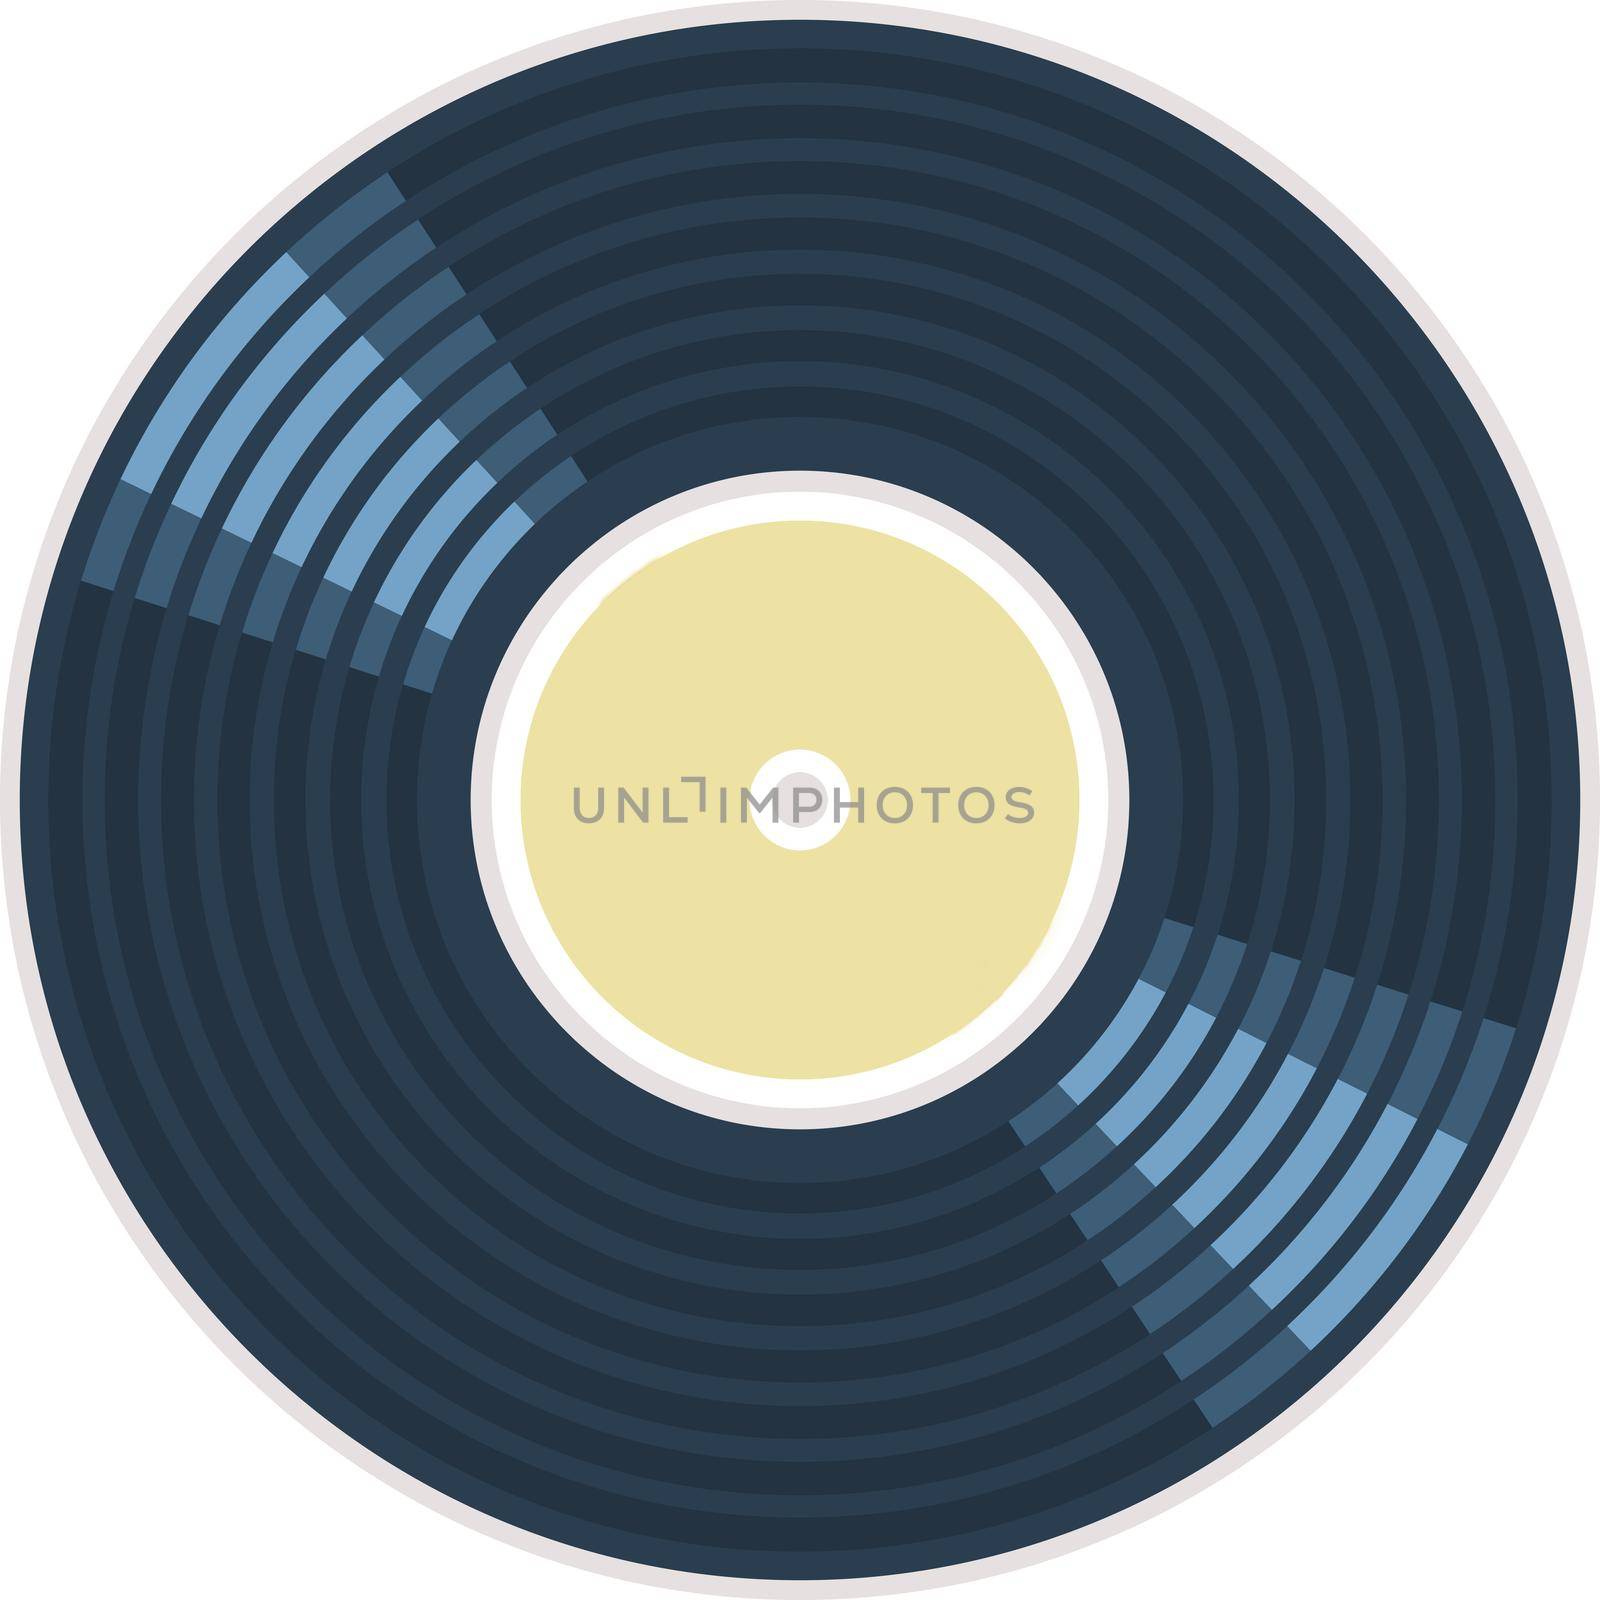 Vintage vinyl record isolated on a white background.Texture or background